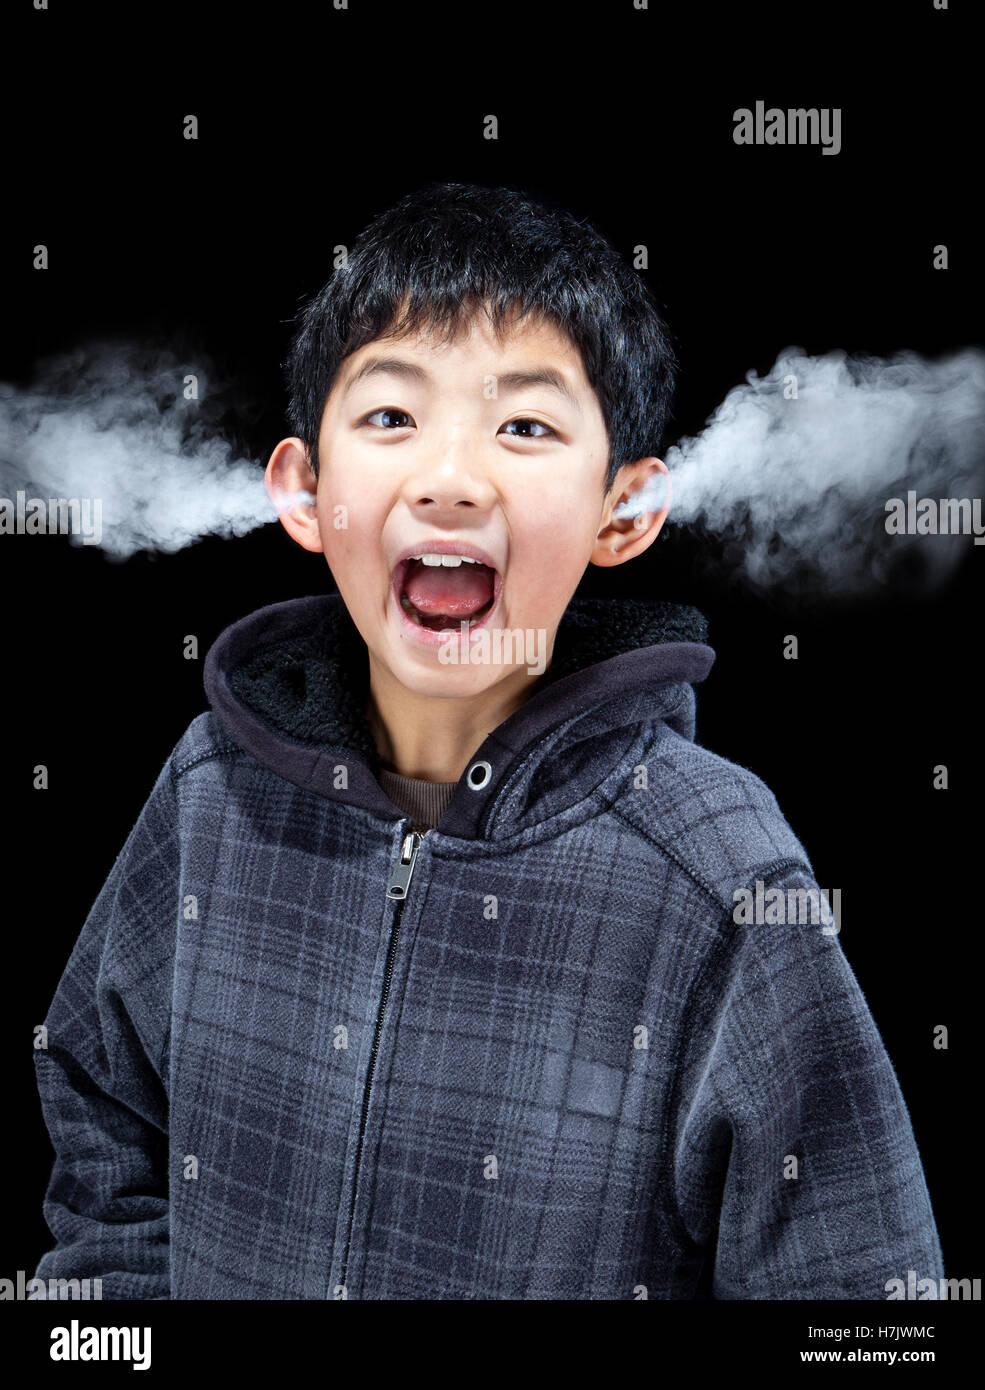 Asian boy letting off steam as he expresses his emotions. Concept of stress, anger, frustration and extreme emotions. Stock Photo